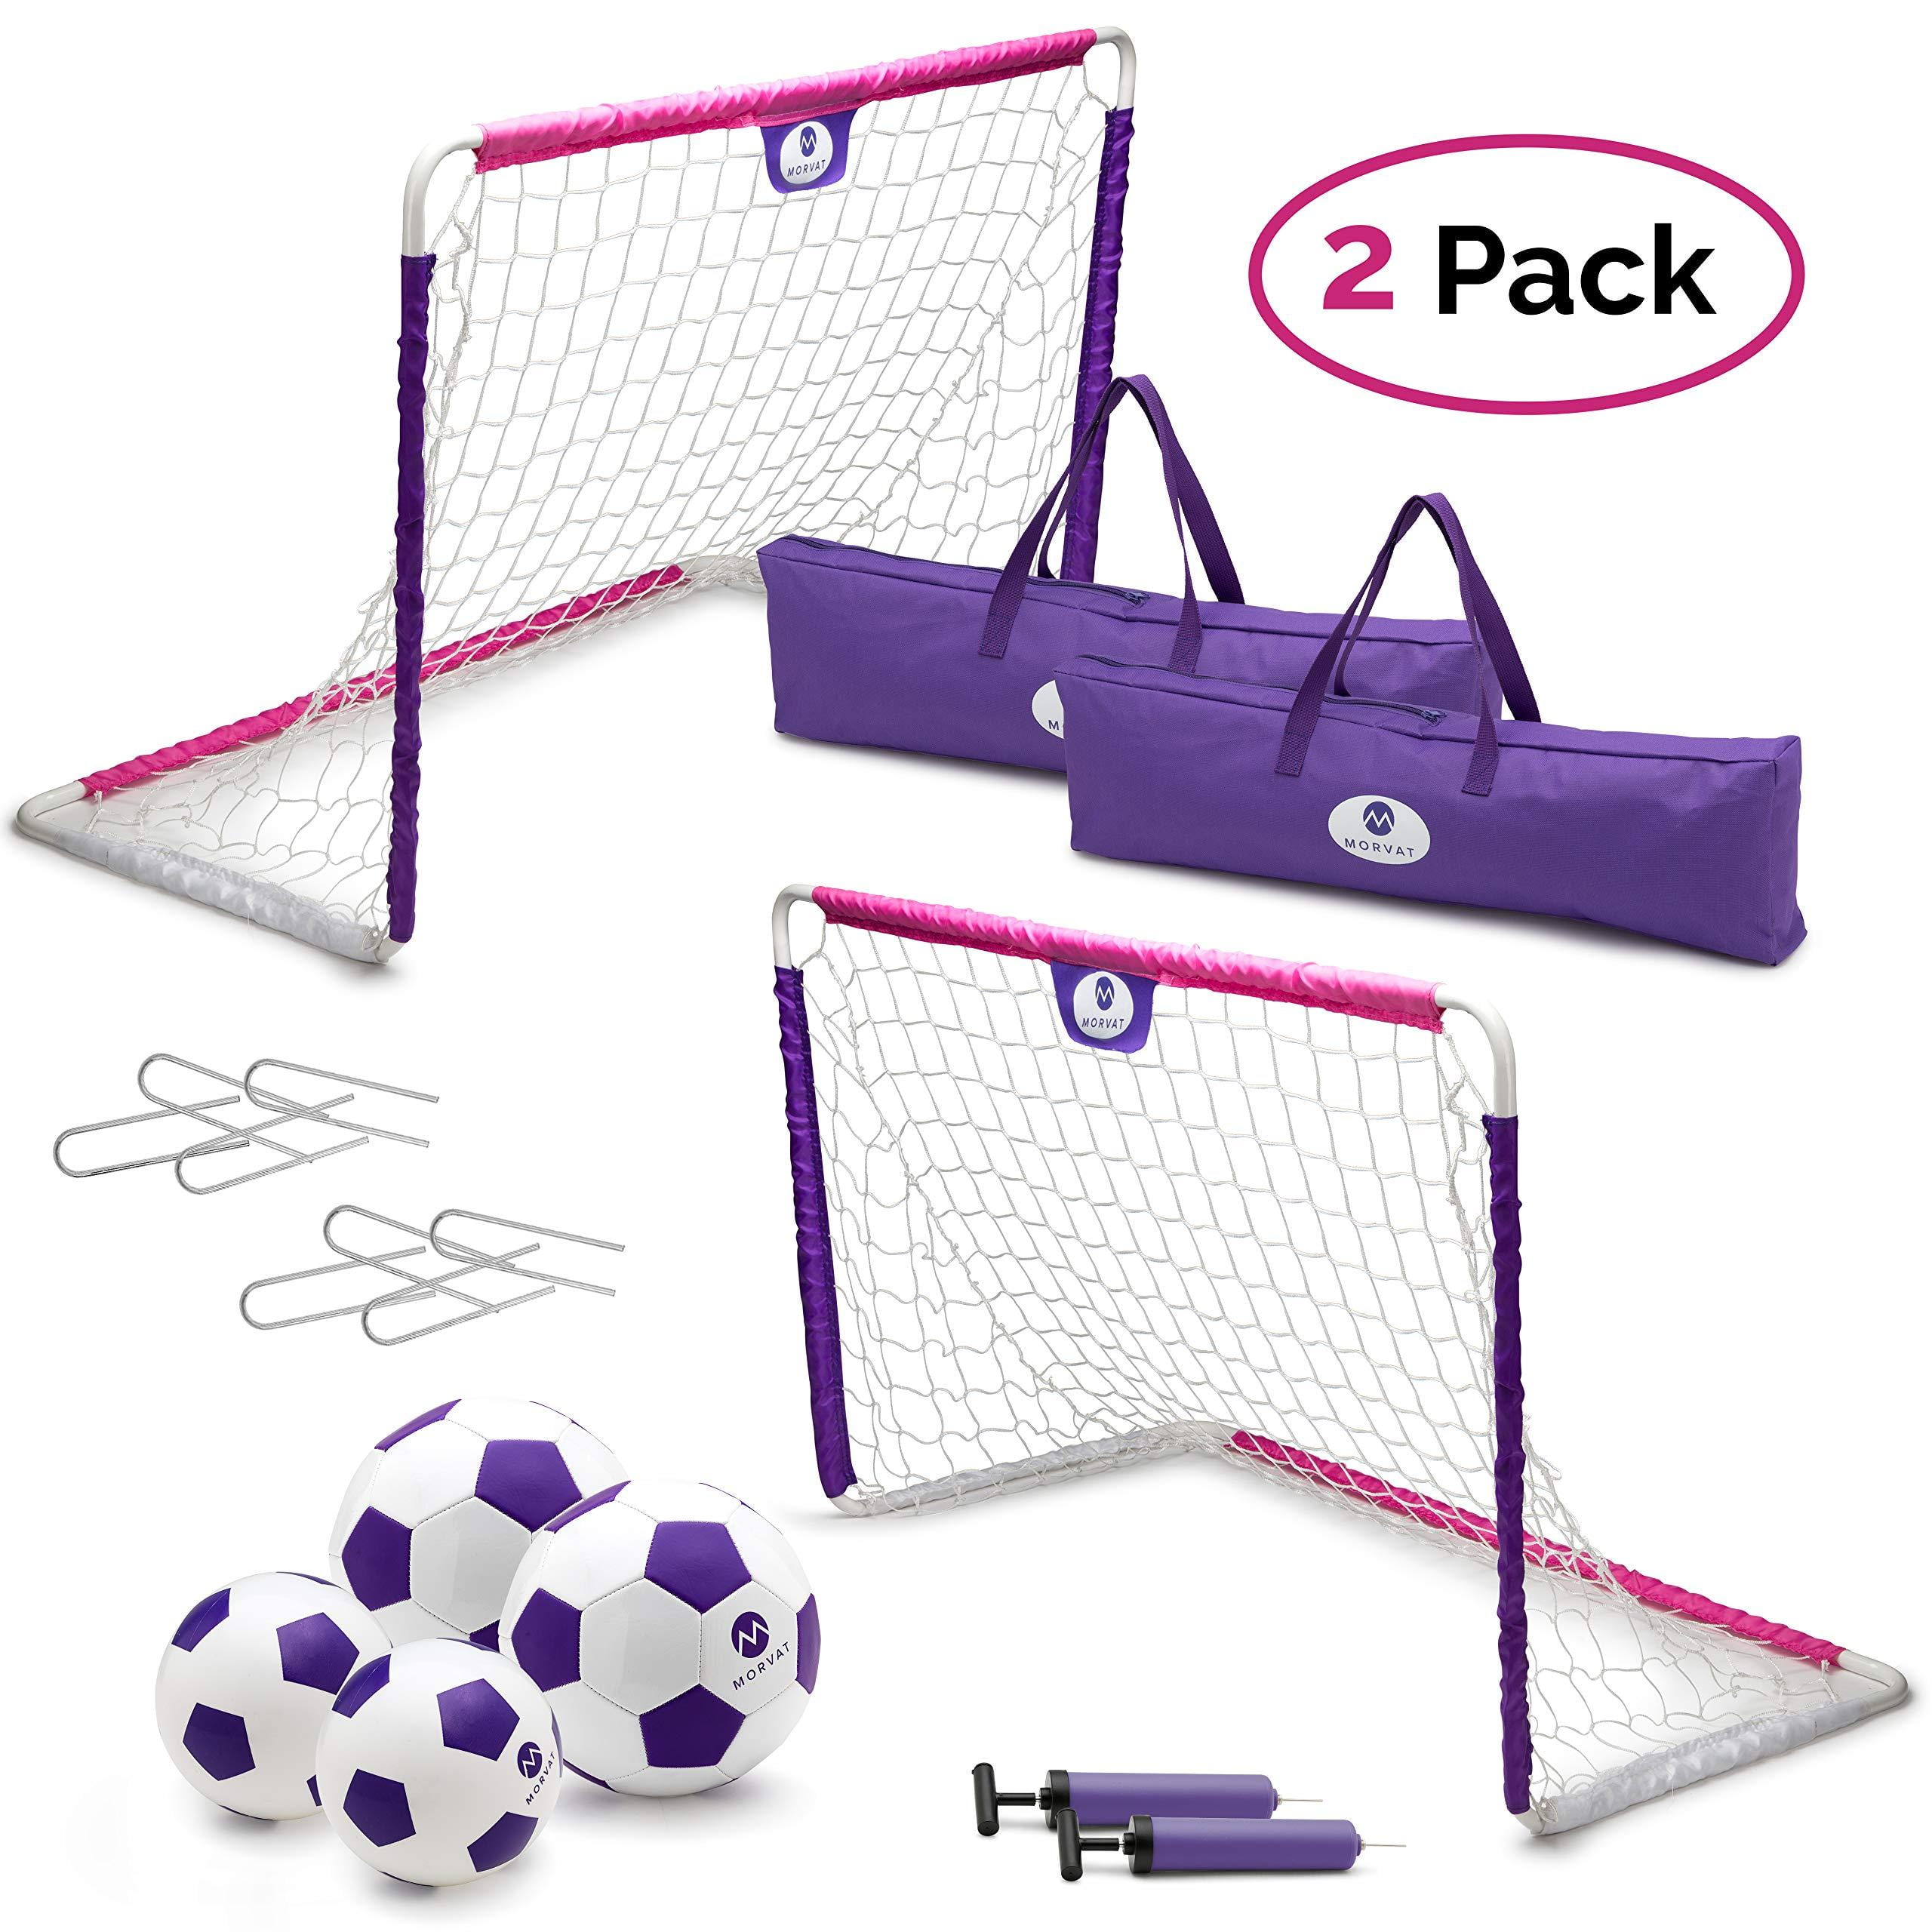 Portable 2 in 1 Pop-Up Kids Soccer Goal Net SOCCER TARGET SPORTS WITH CARRY BAG 